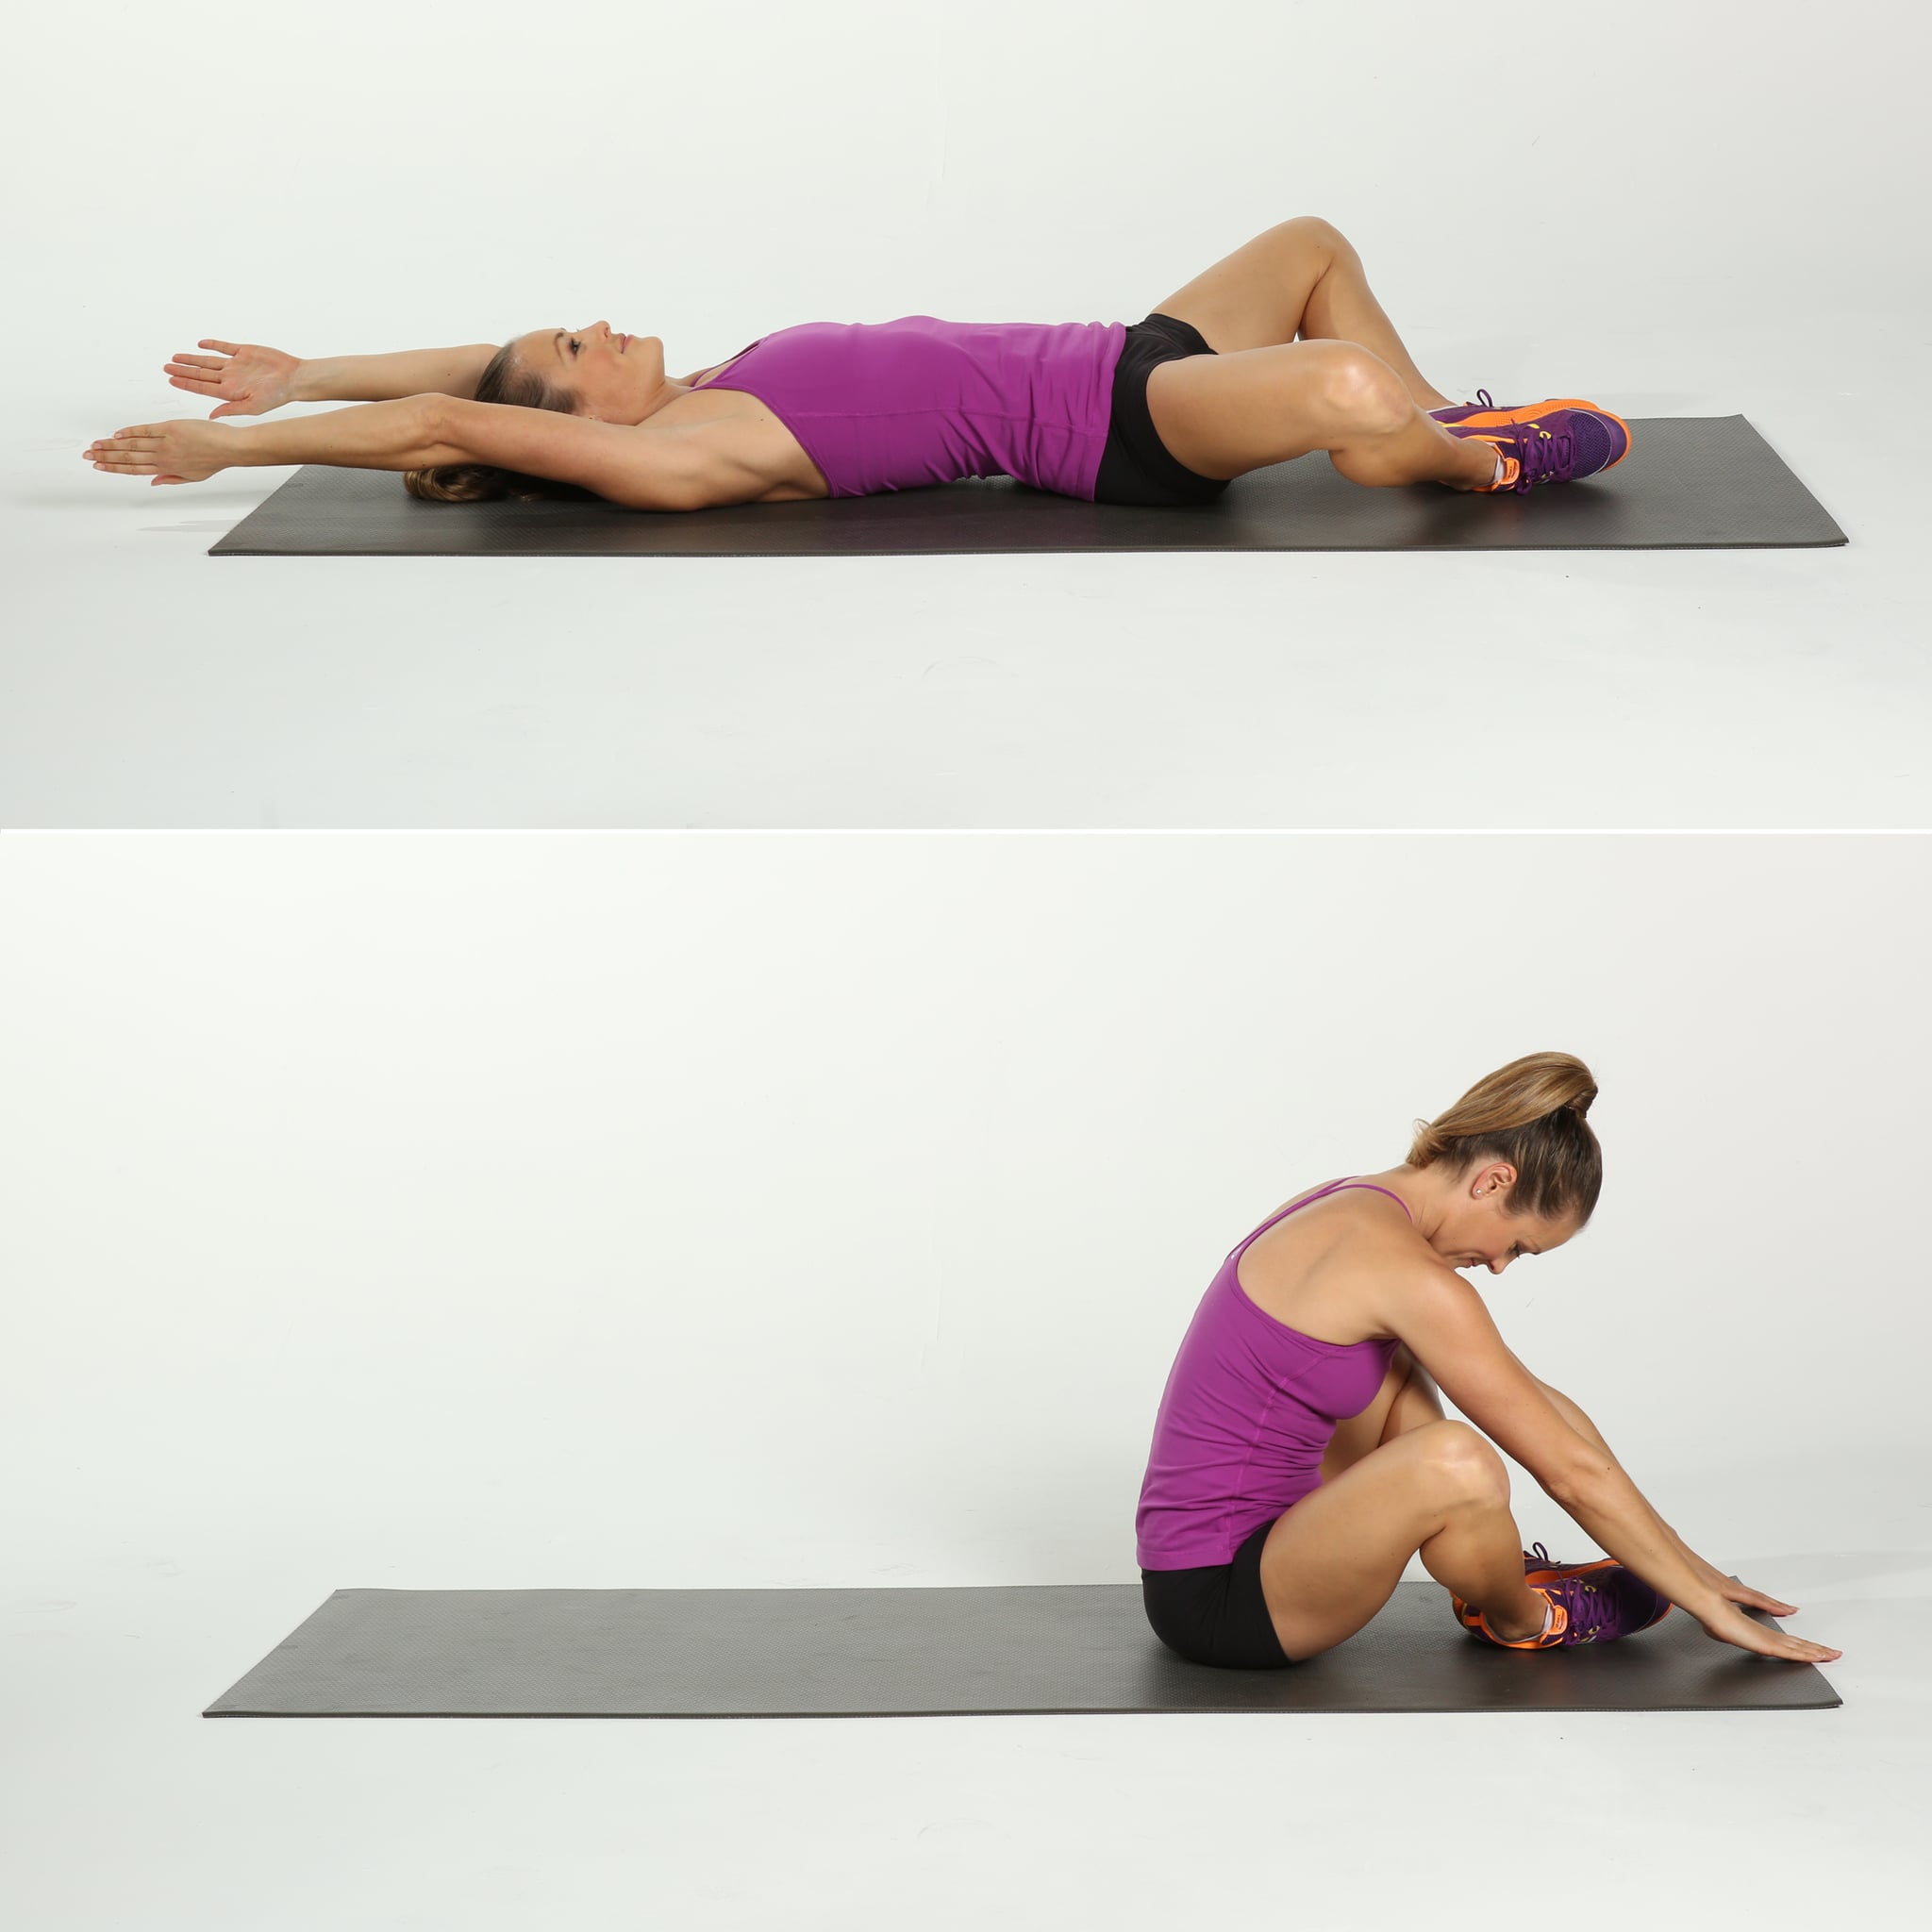 Laag Viskeus Gebakjes AbMat Sit-Ups (Diamond Sit-Up) | Build Strength and Endurance With This  Heart-Pumping 30-Minute CrossFit HIIT Workout | POPSUGAR Fitness Photo 7